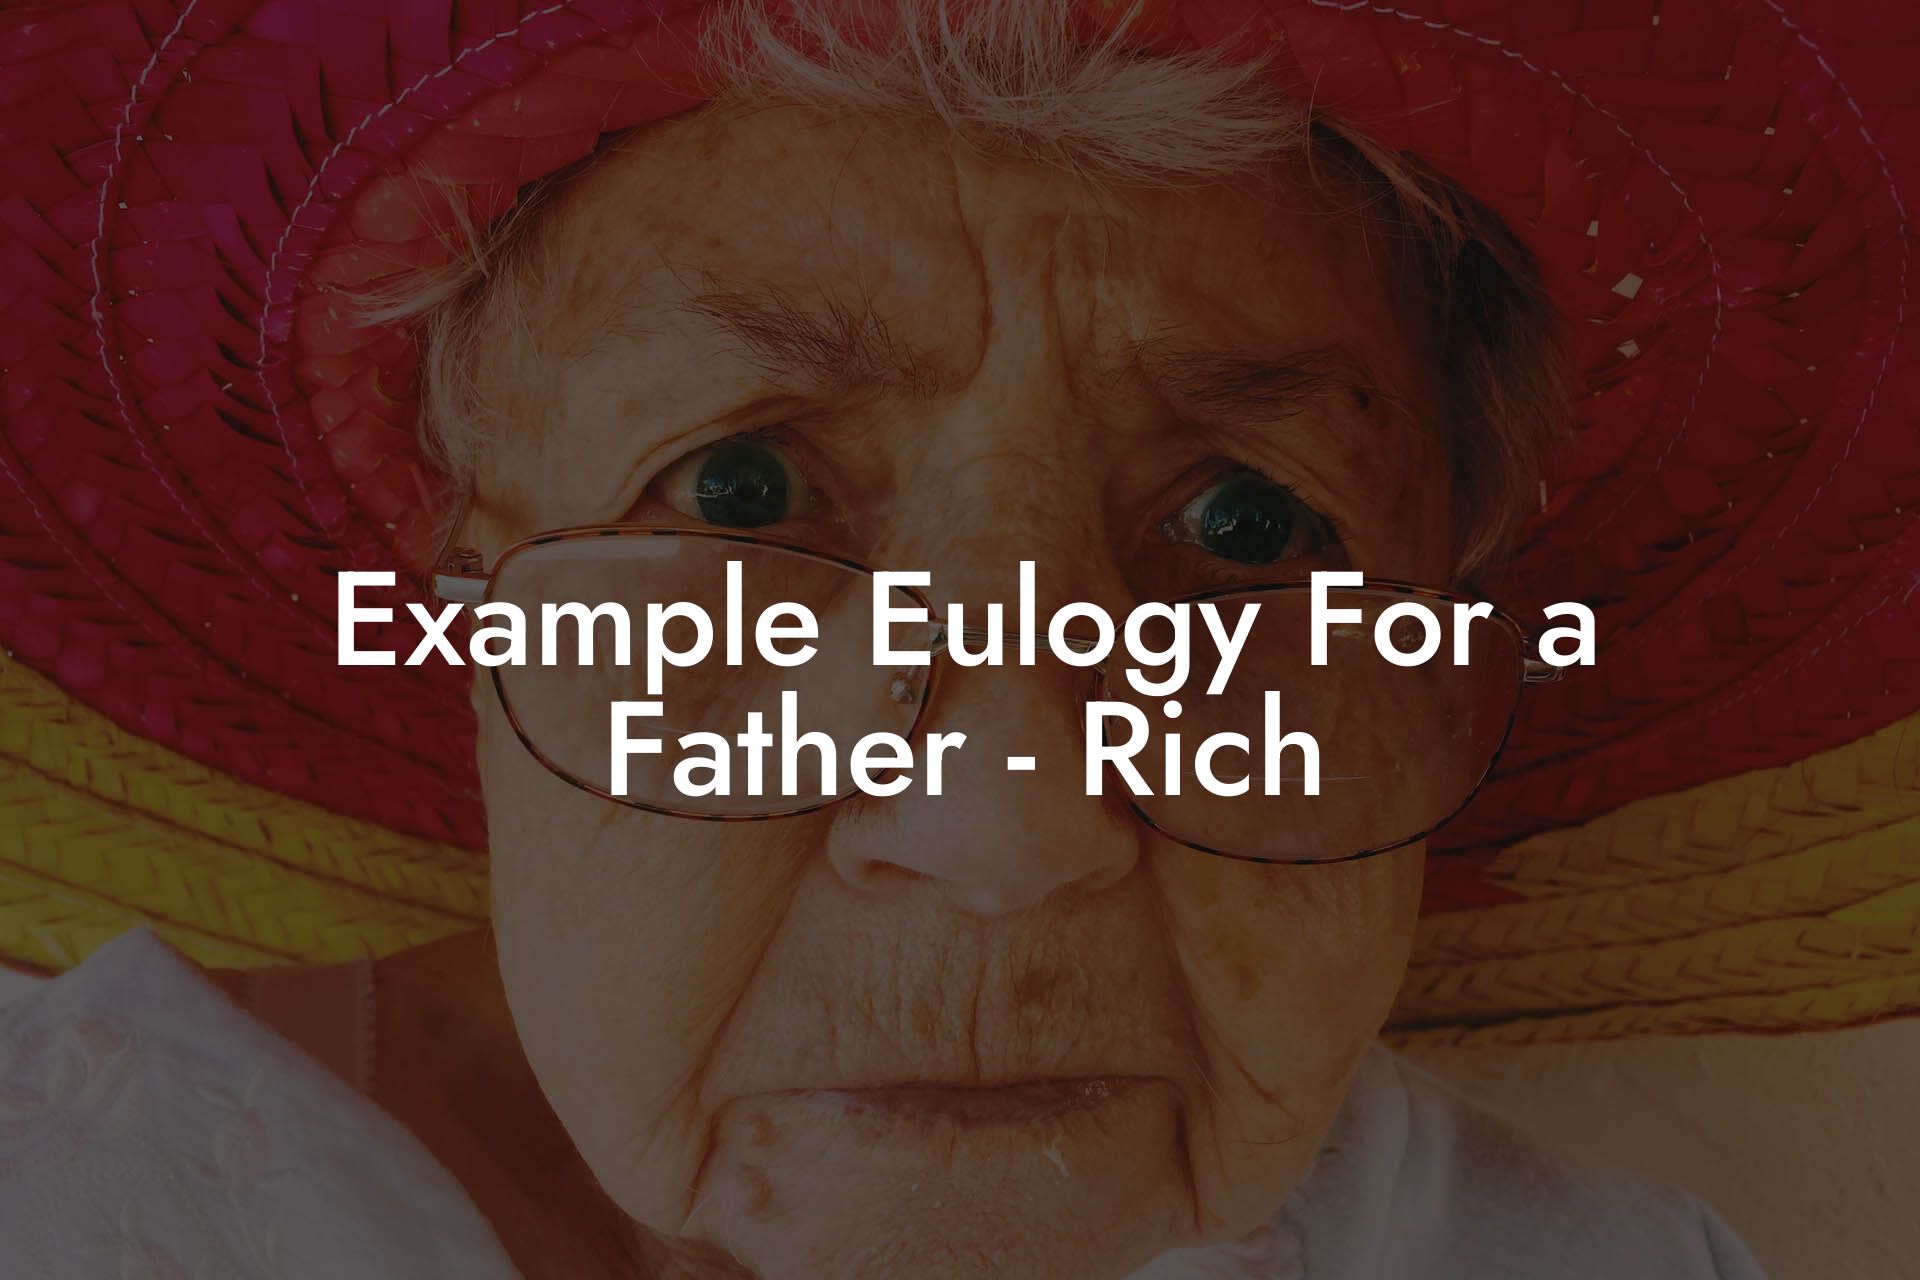 Example Eulogy For a Father - Rich